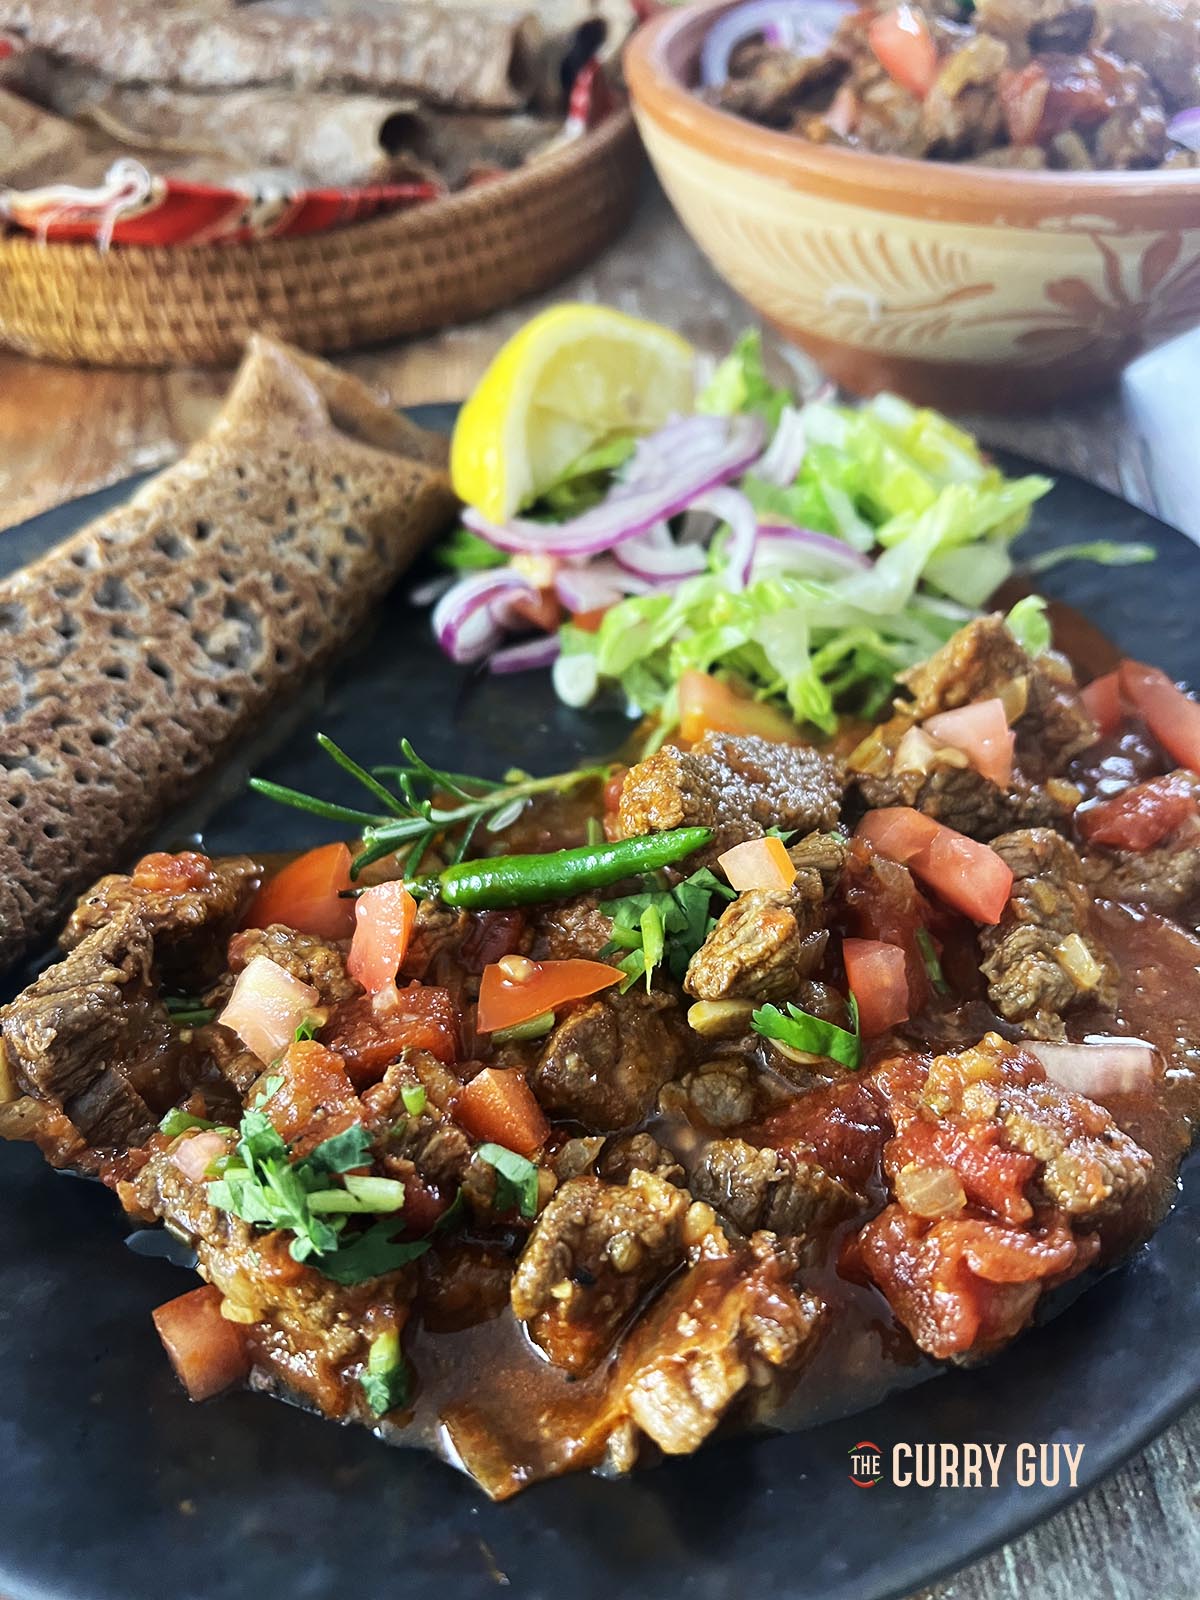 Serving the beef tibs with injere bread and salad.